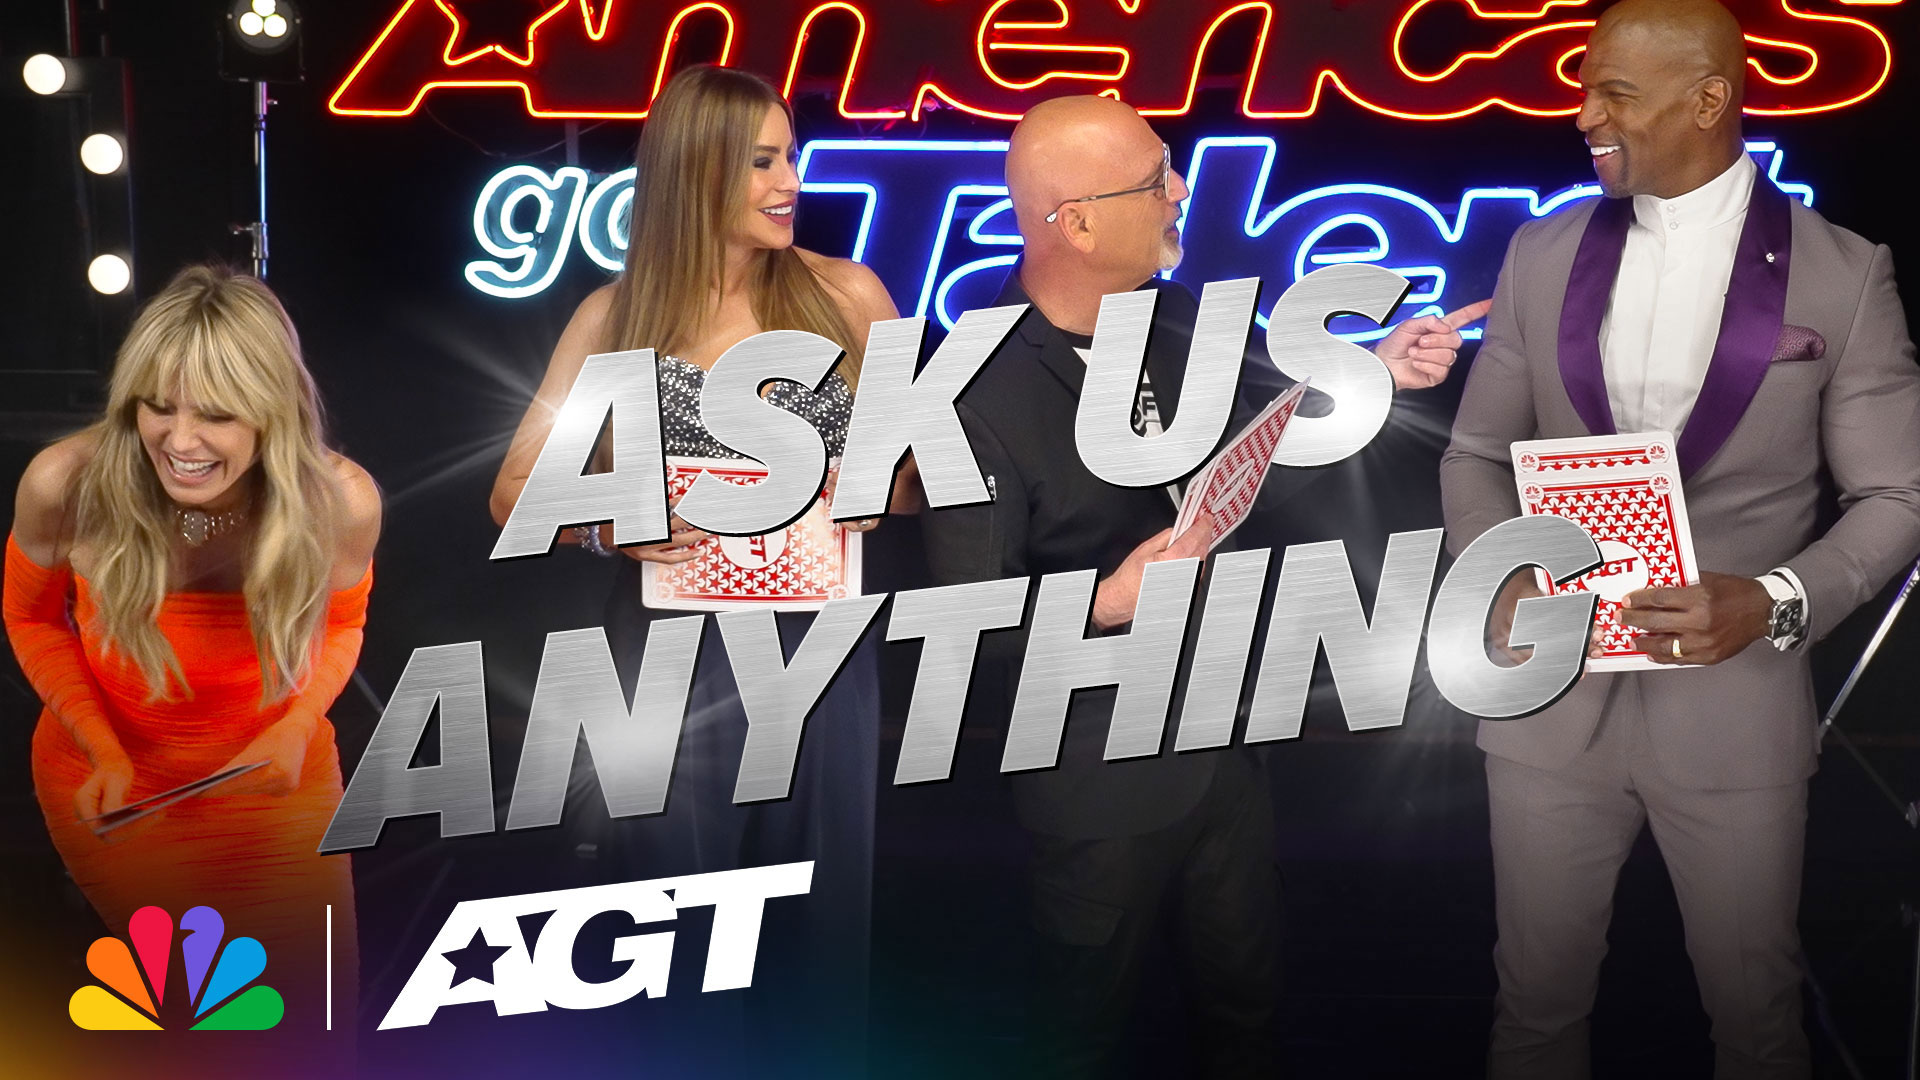 MOS is starting their journey off with a BANG 🎷Watch #AGT on @NBC an